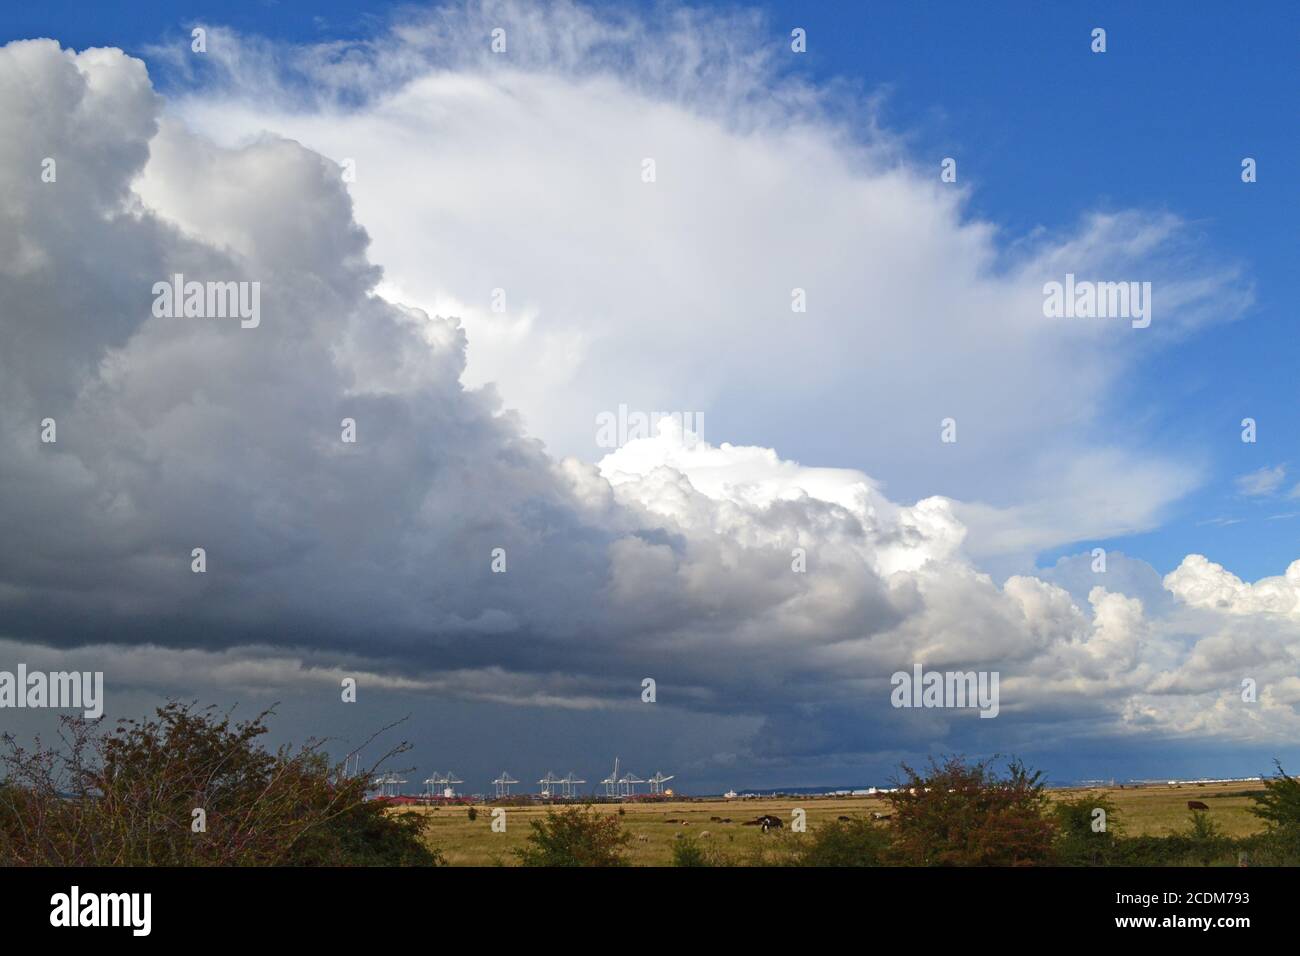 Storm with anvil cloud, a cumulonimbus, seen over Essex from Cliffe, north Kent looking over River Thames and DP World Gateway container port, August. Stock Photo